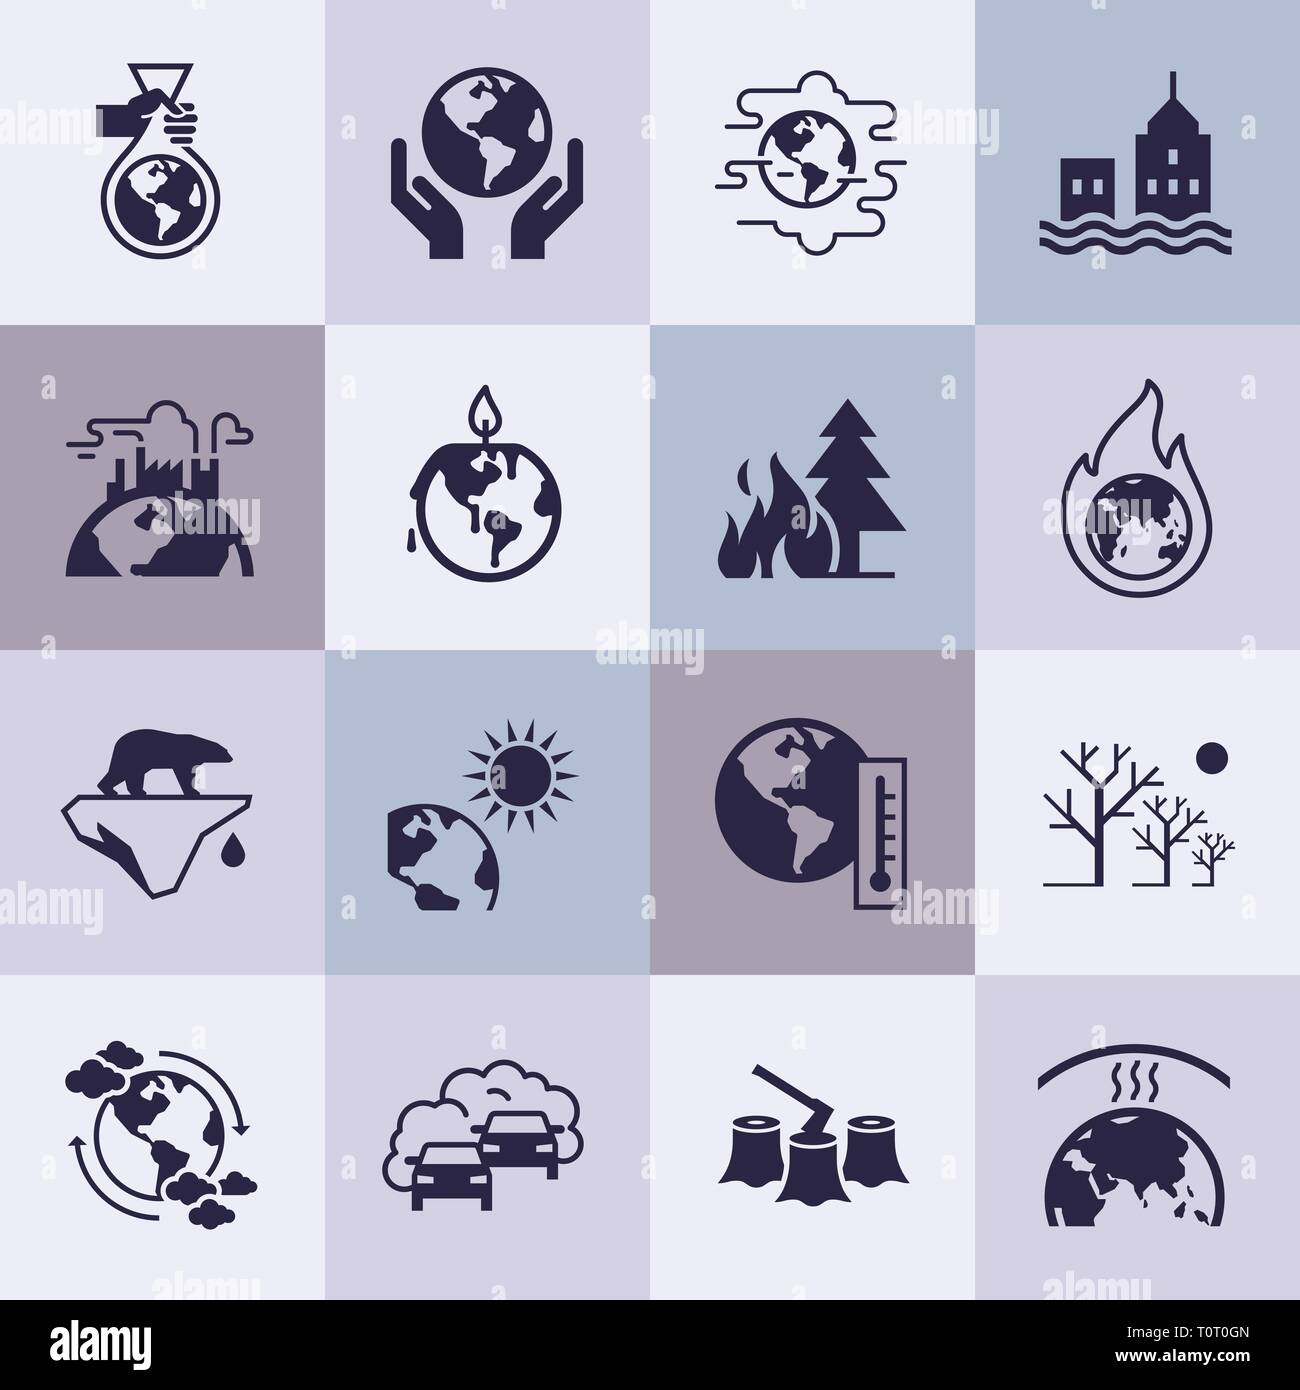 Set of vector icons on the theme of ecology, global warming and ecology problems of our planet as a whole. Stock Vector